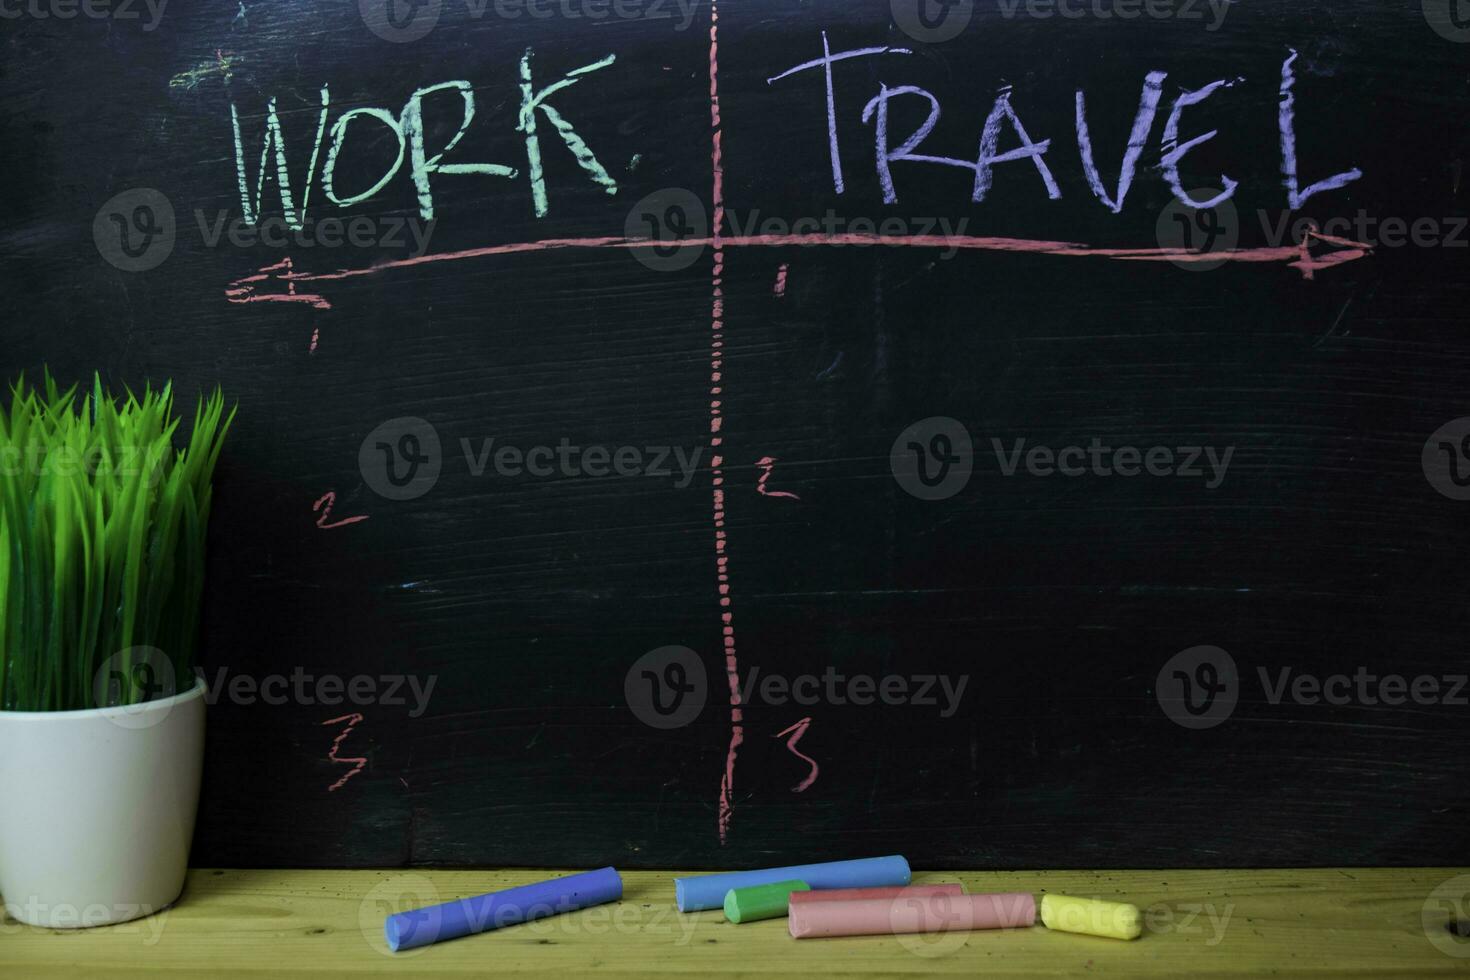 Work or Travel written with color chalk concept on the blackboard photo